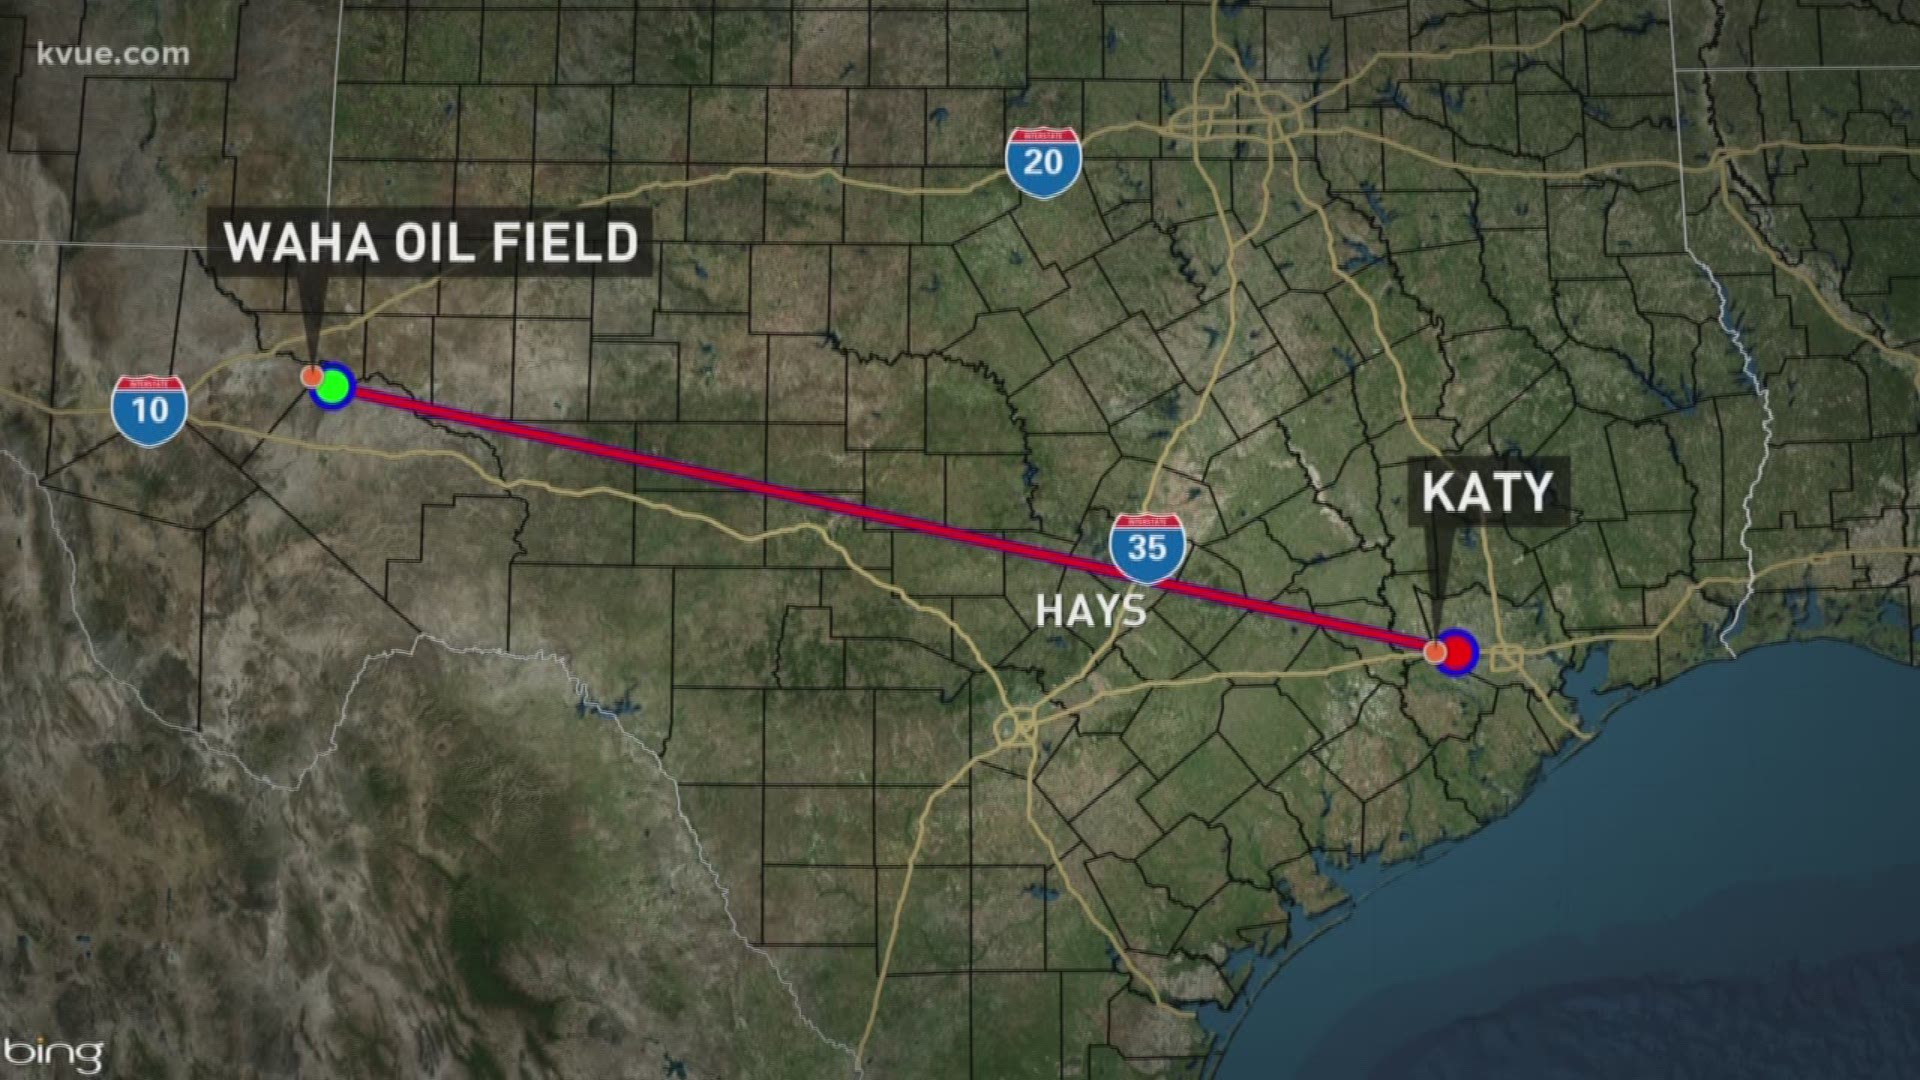 The company Kinder Morgan is considering running a natural gas pipeline through Hays County as it goes from a remote part of West Texas to near Houston.